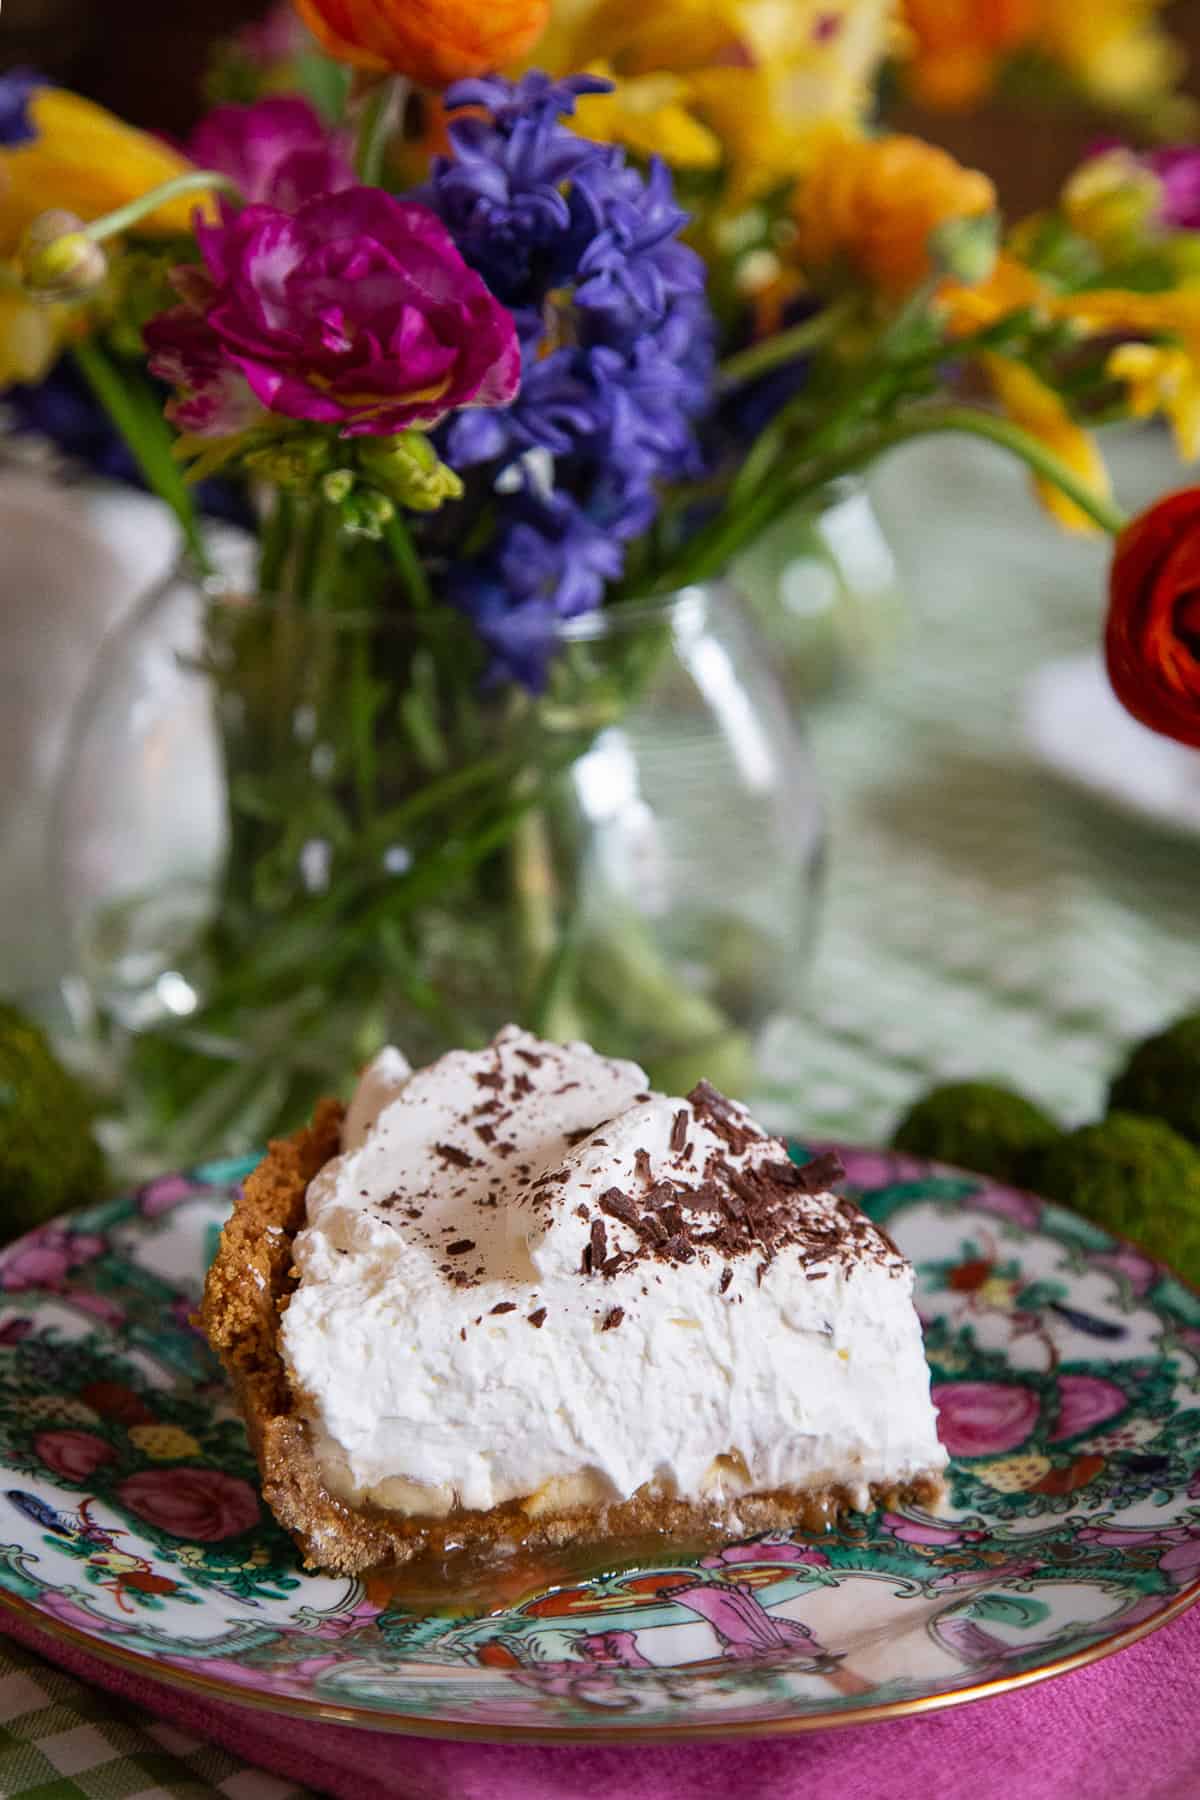 slice of banoffee pie on a china plate next to a vase of colorful flowers.